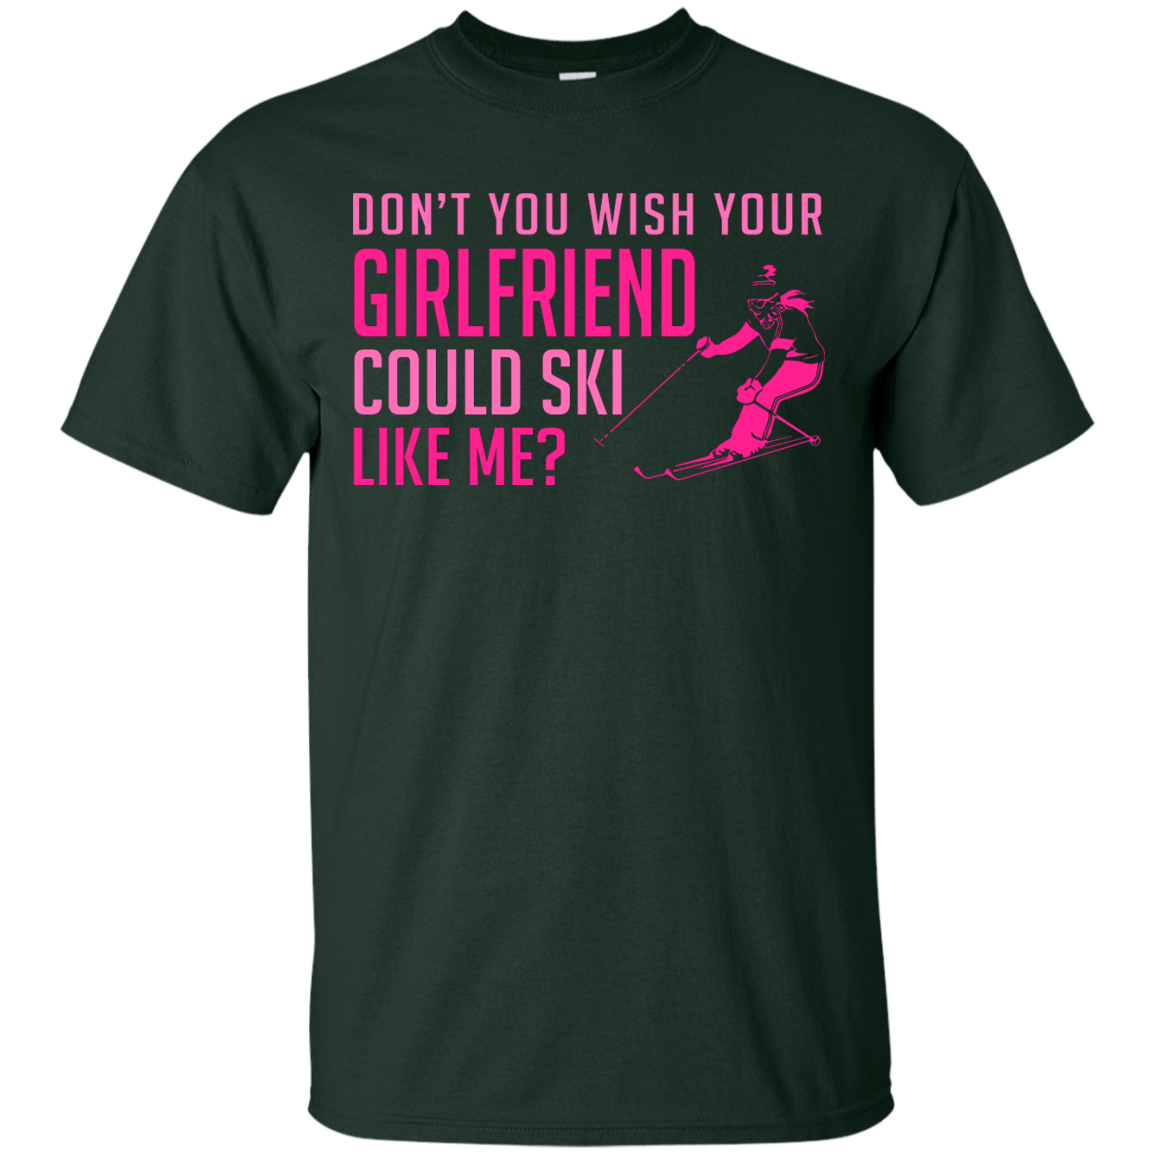 Don't You Wish Your Girlfriend Could Ski Like Me? Tees - Powderaddicts